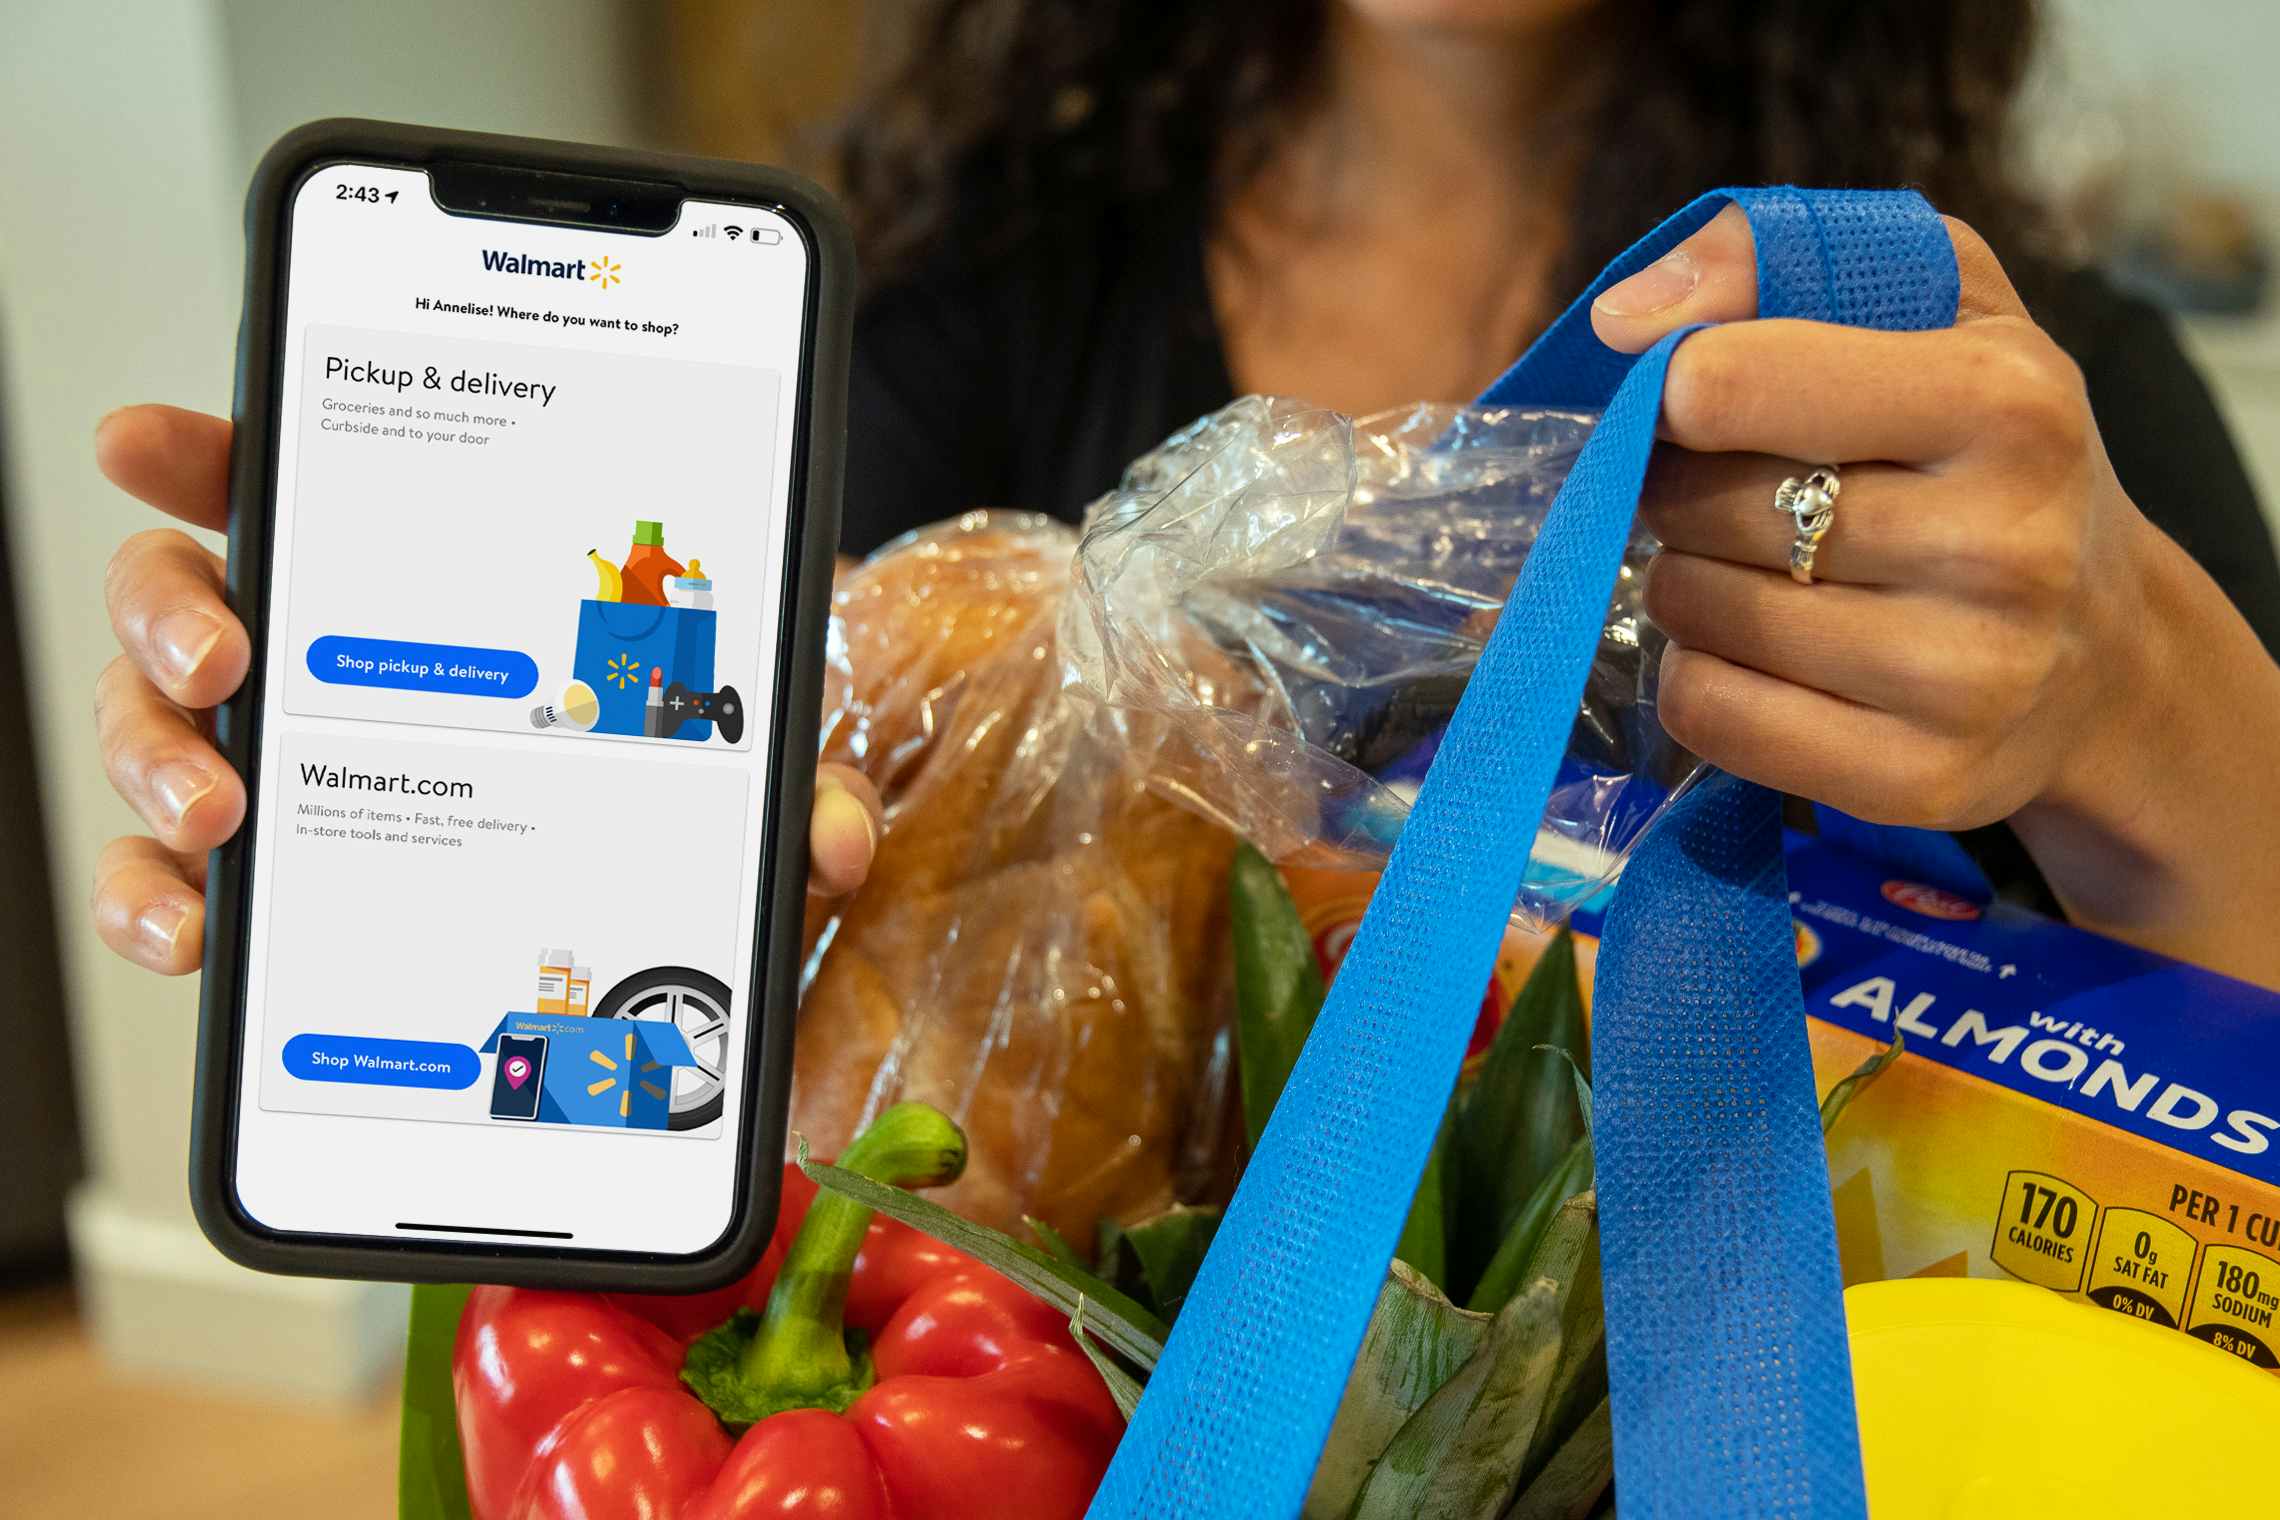 Woman holding a bag of Walmart groceries in one hand with a cell phone with the Walmart app on the other.